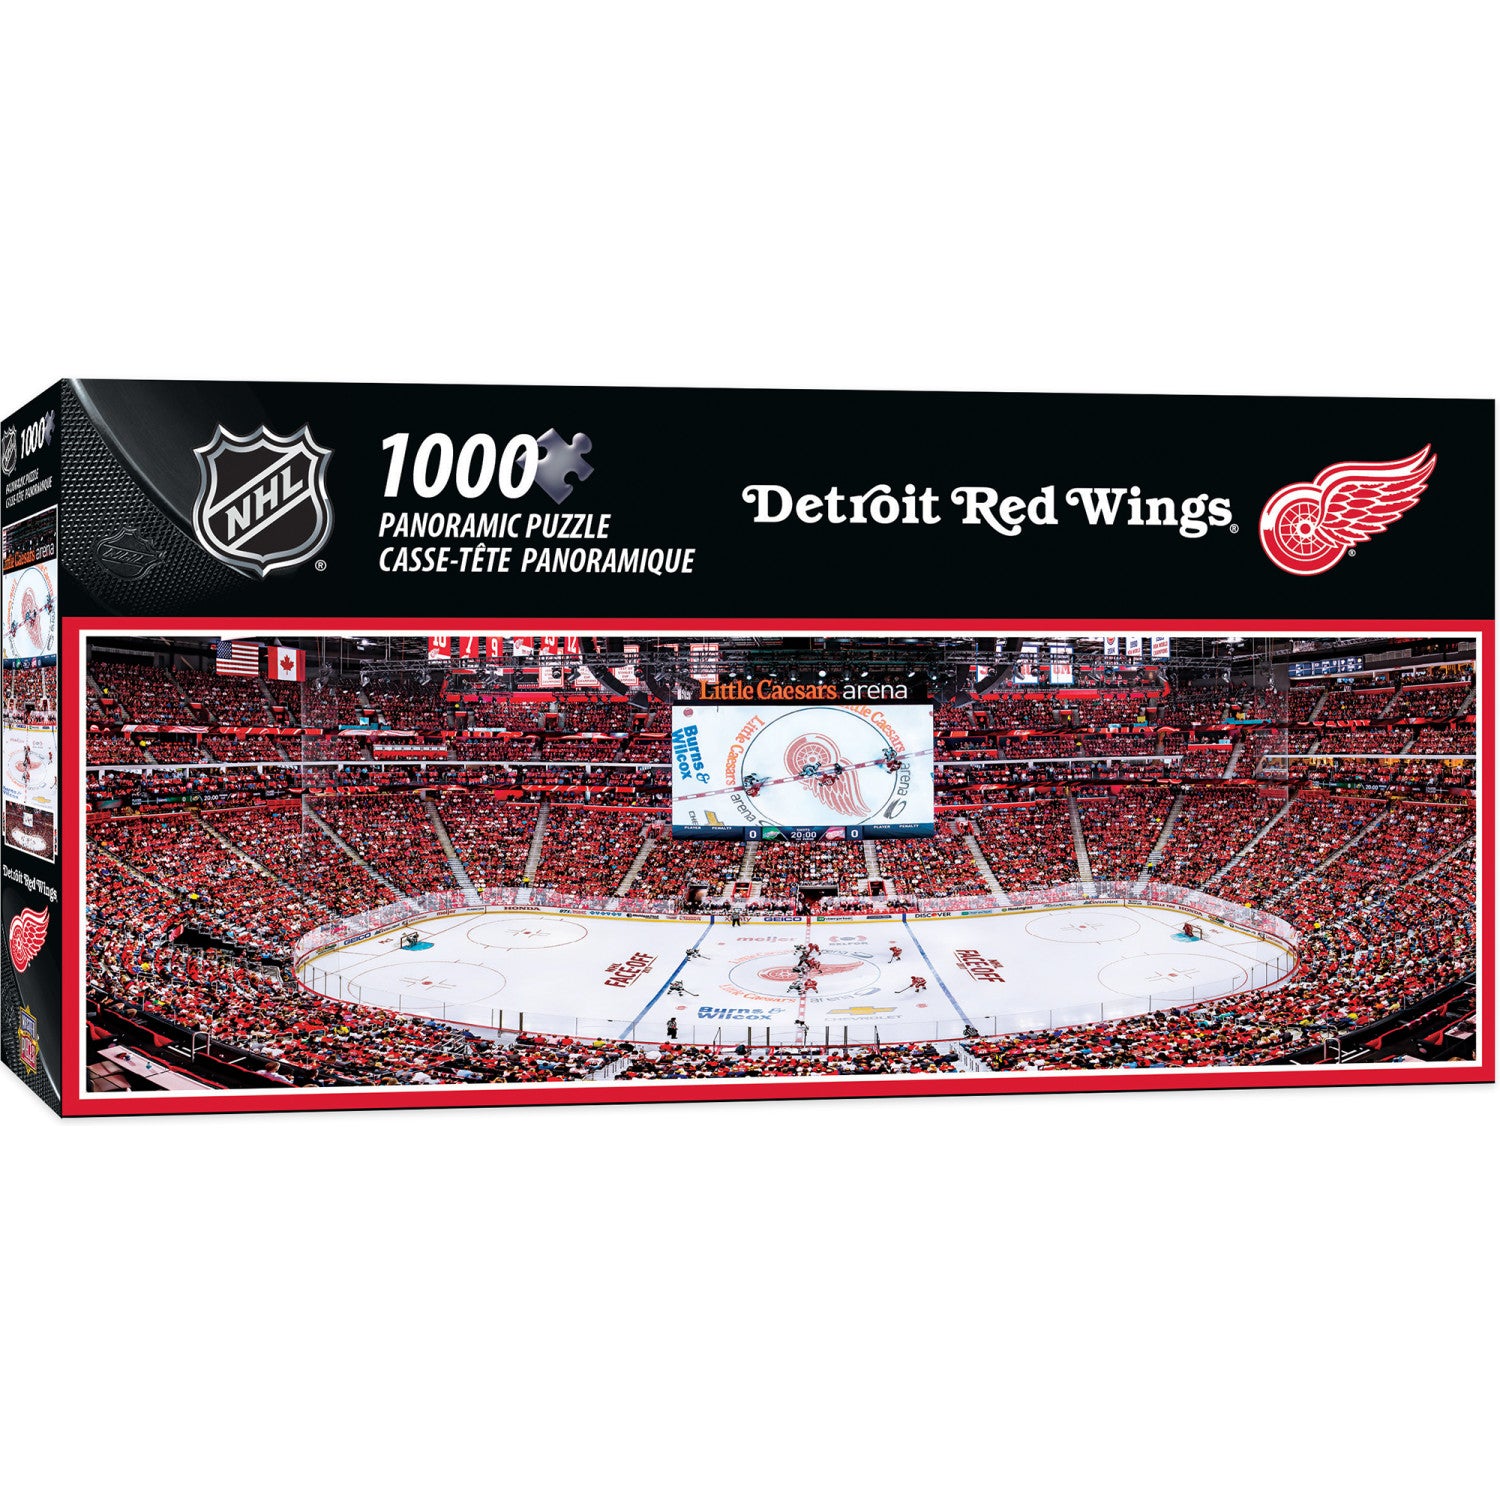 Detroit Red Wings - 1000 Piece Panoramic Jigsaw Puzzle